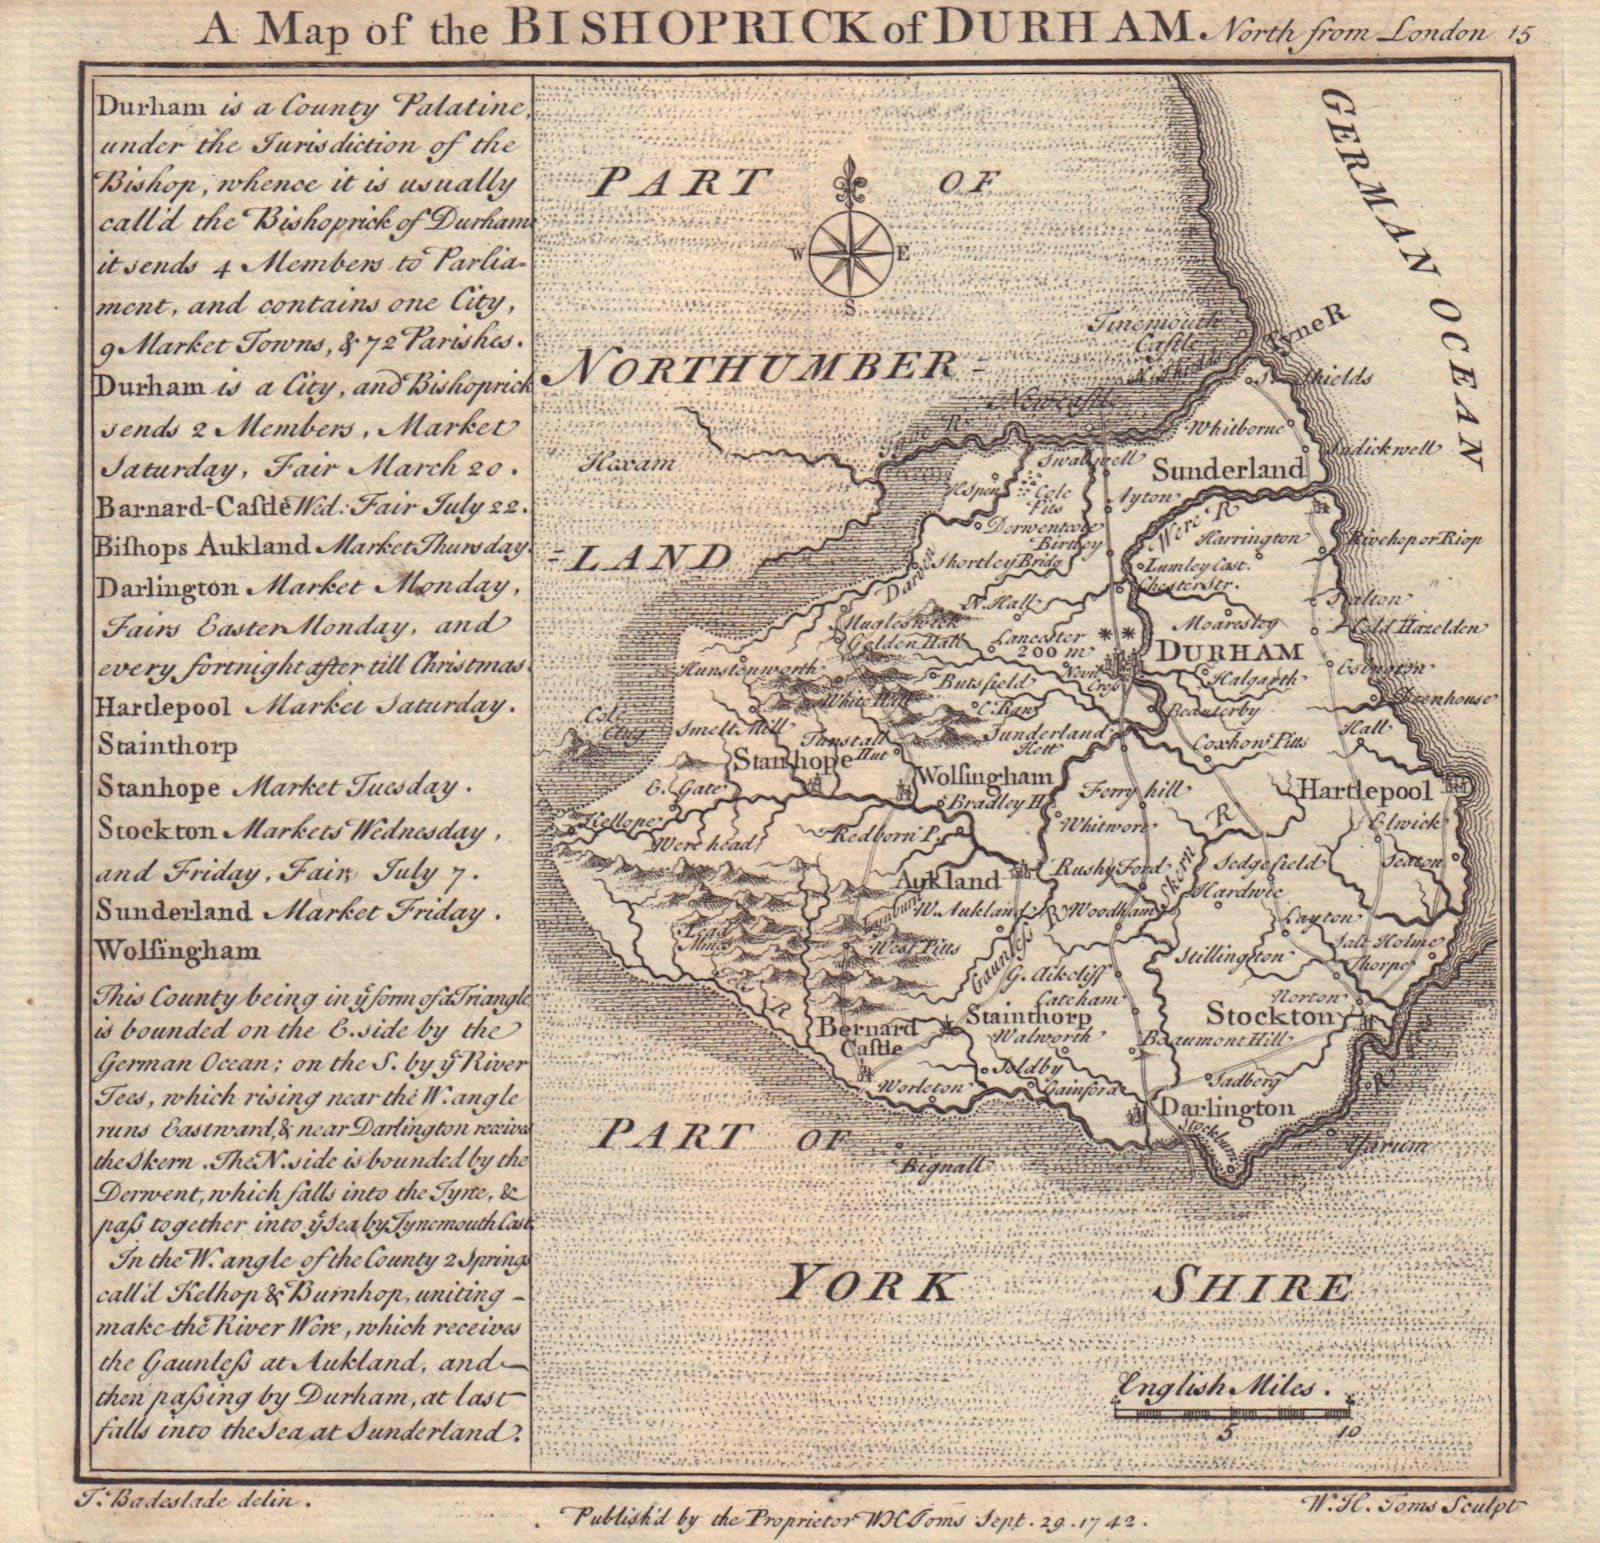 Antique county map of the Bishoprick of Durham by Badeslade & Toms 1742